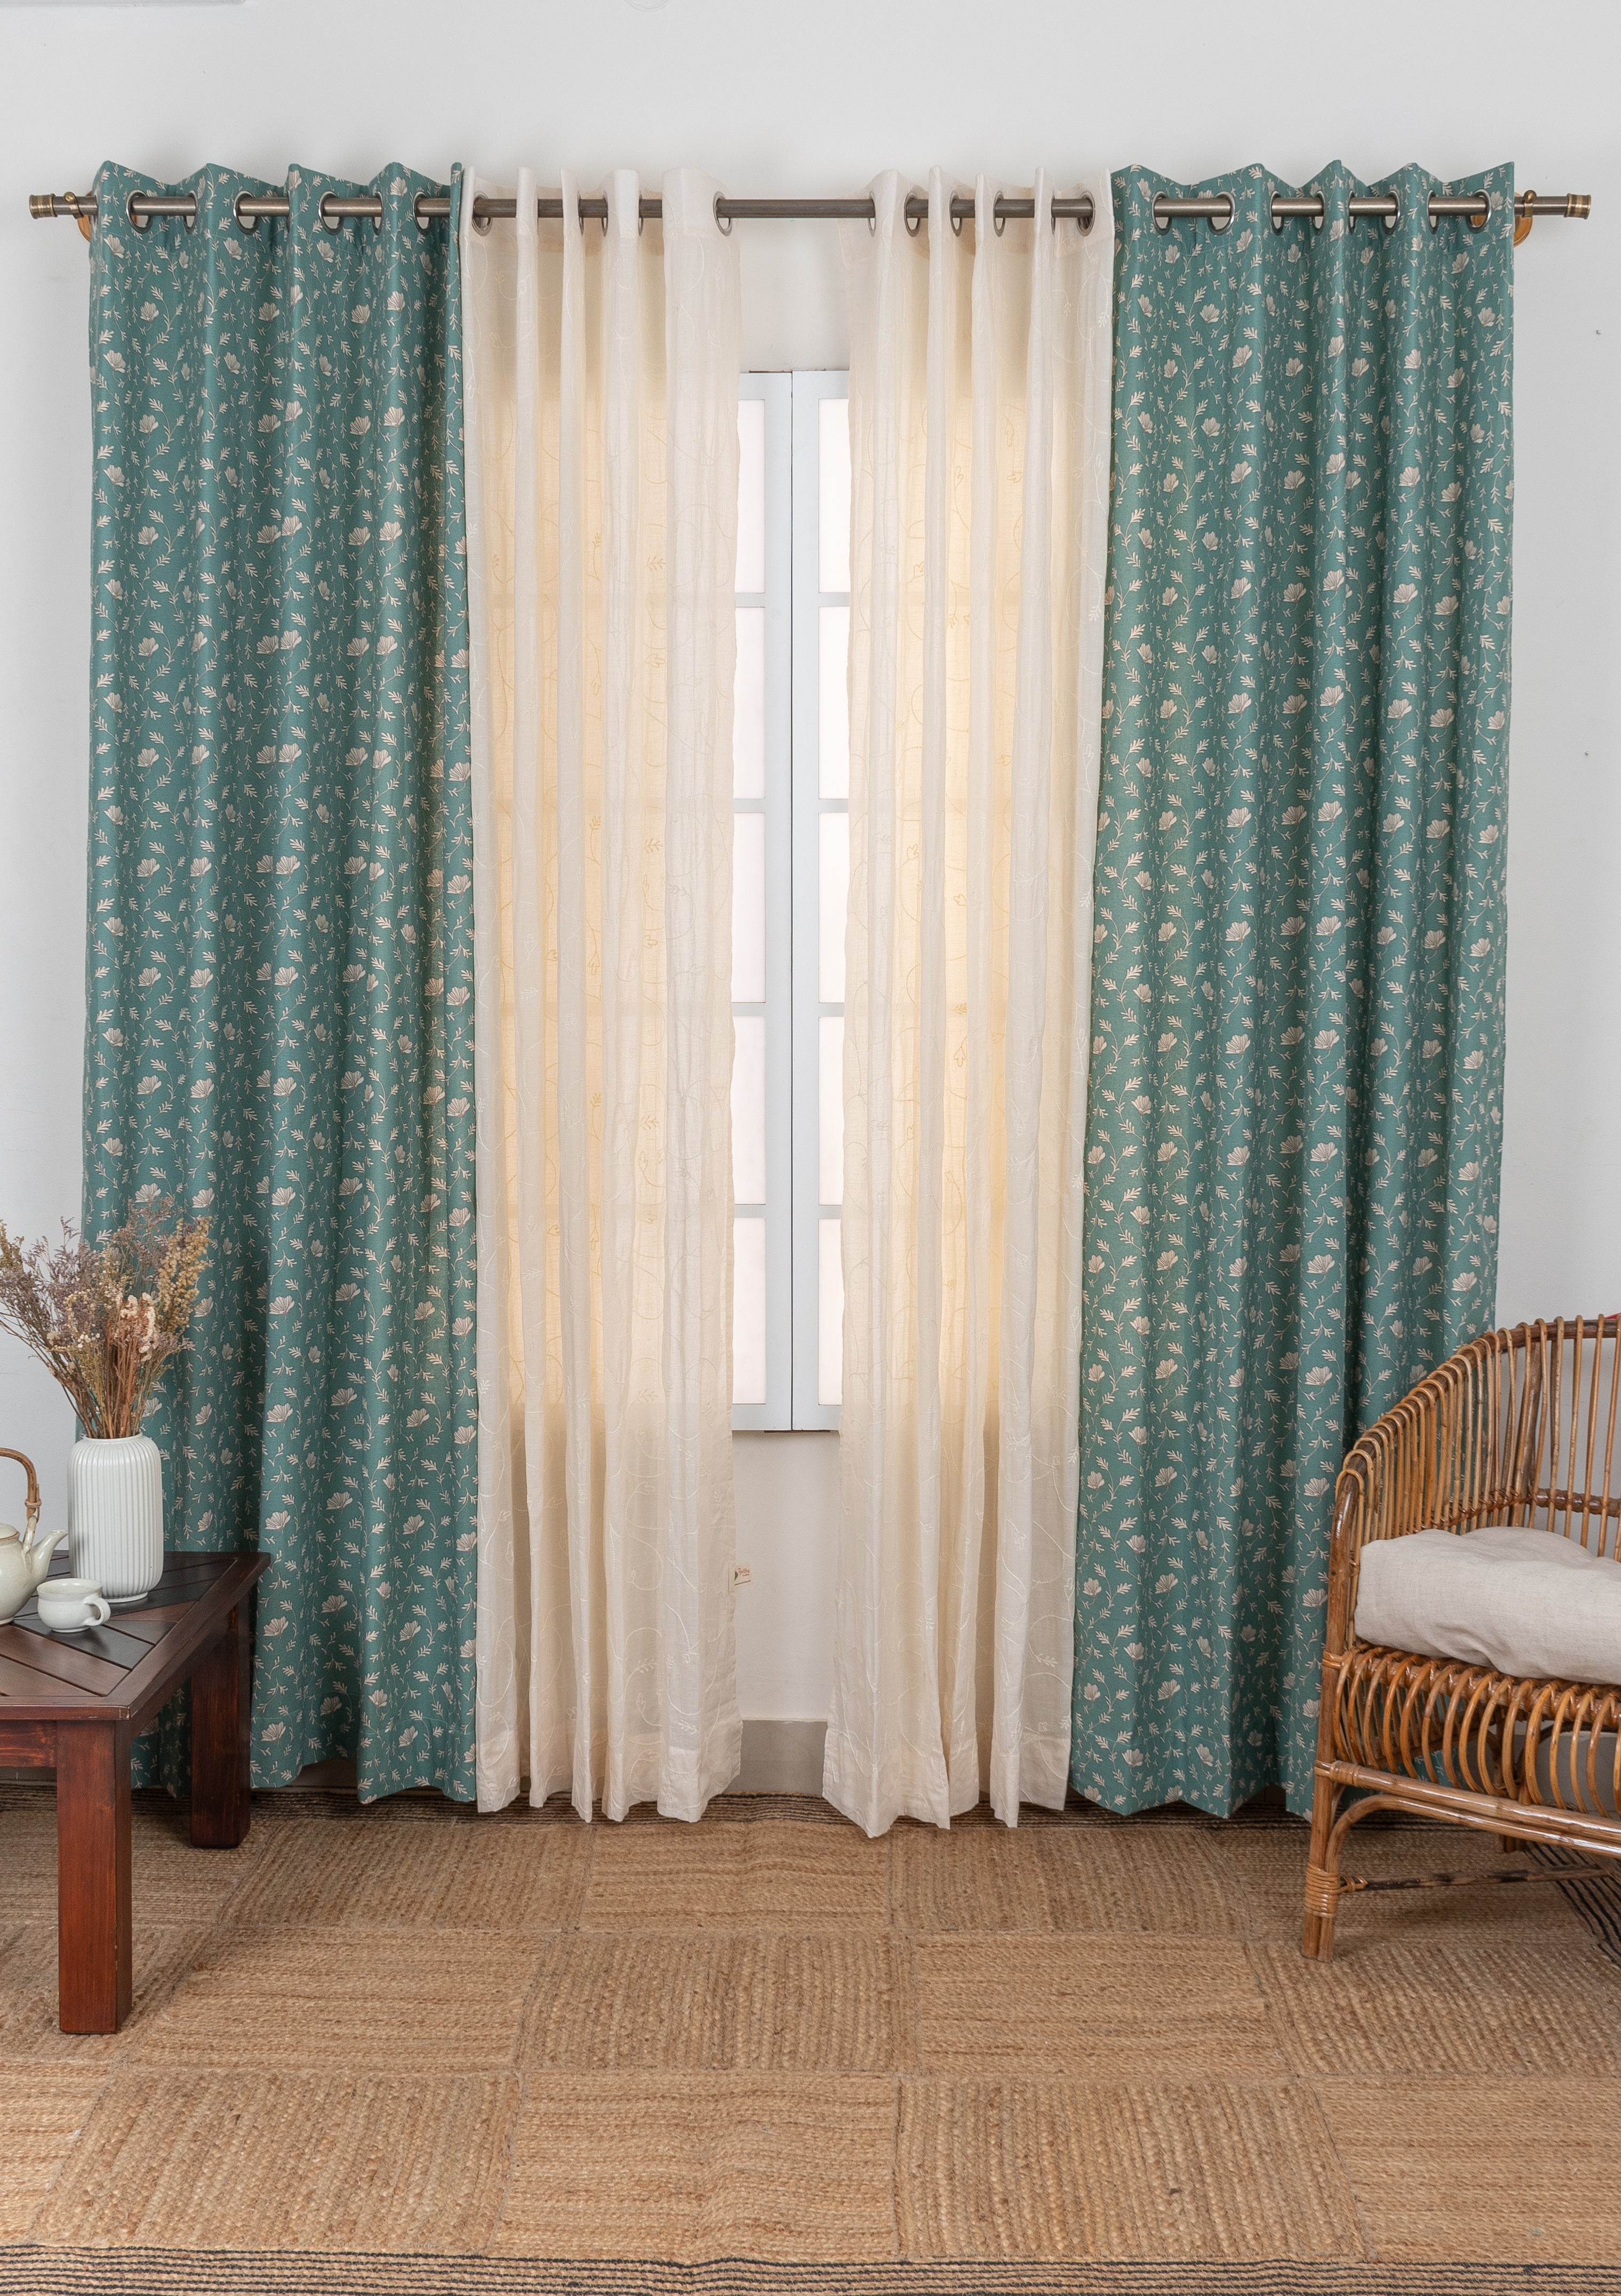 Eden floral cotton curtain Aqua blue with Ivy wines embroidered cream 100% cotton curtains for living room - Set of 4